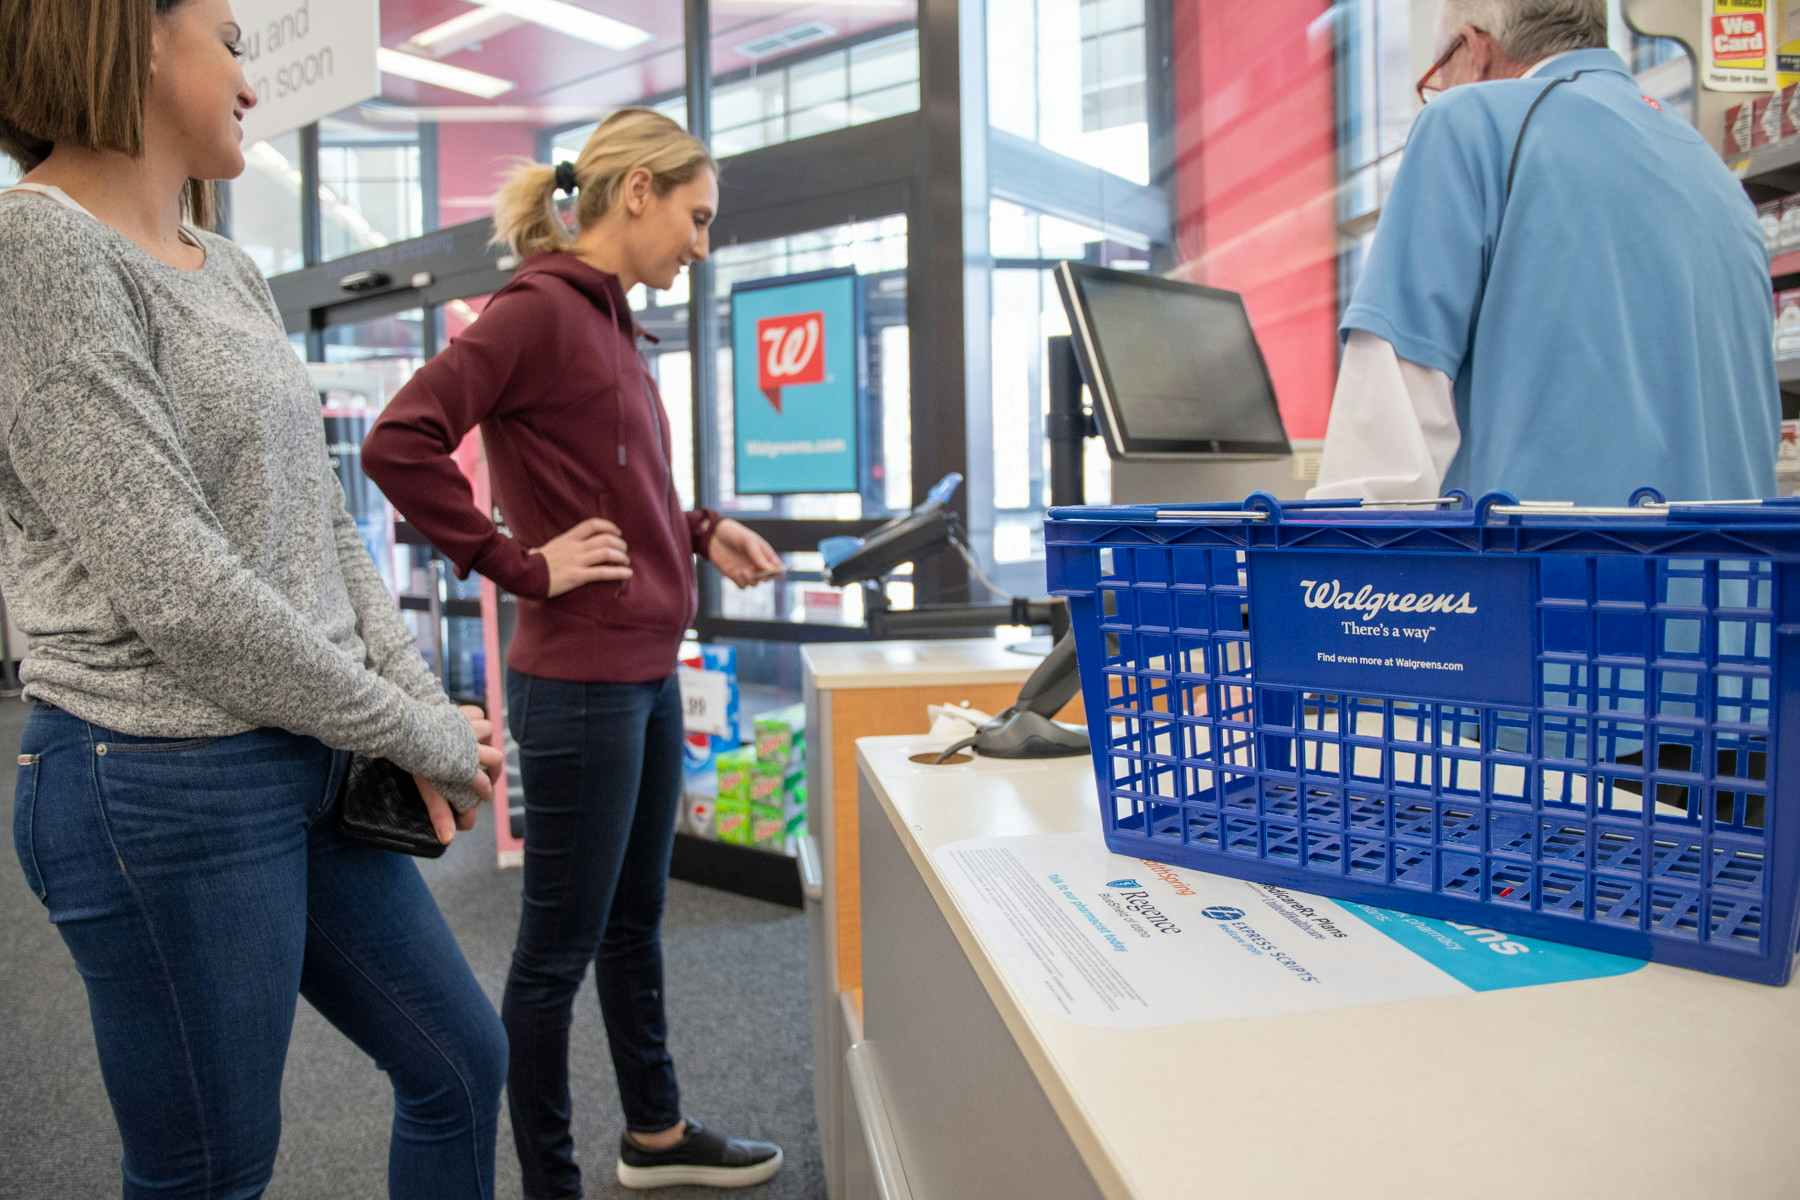 A Walgreens shopping basket on the counter. Two women standing at the checkout with one using the credit card reader to purchase items.